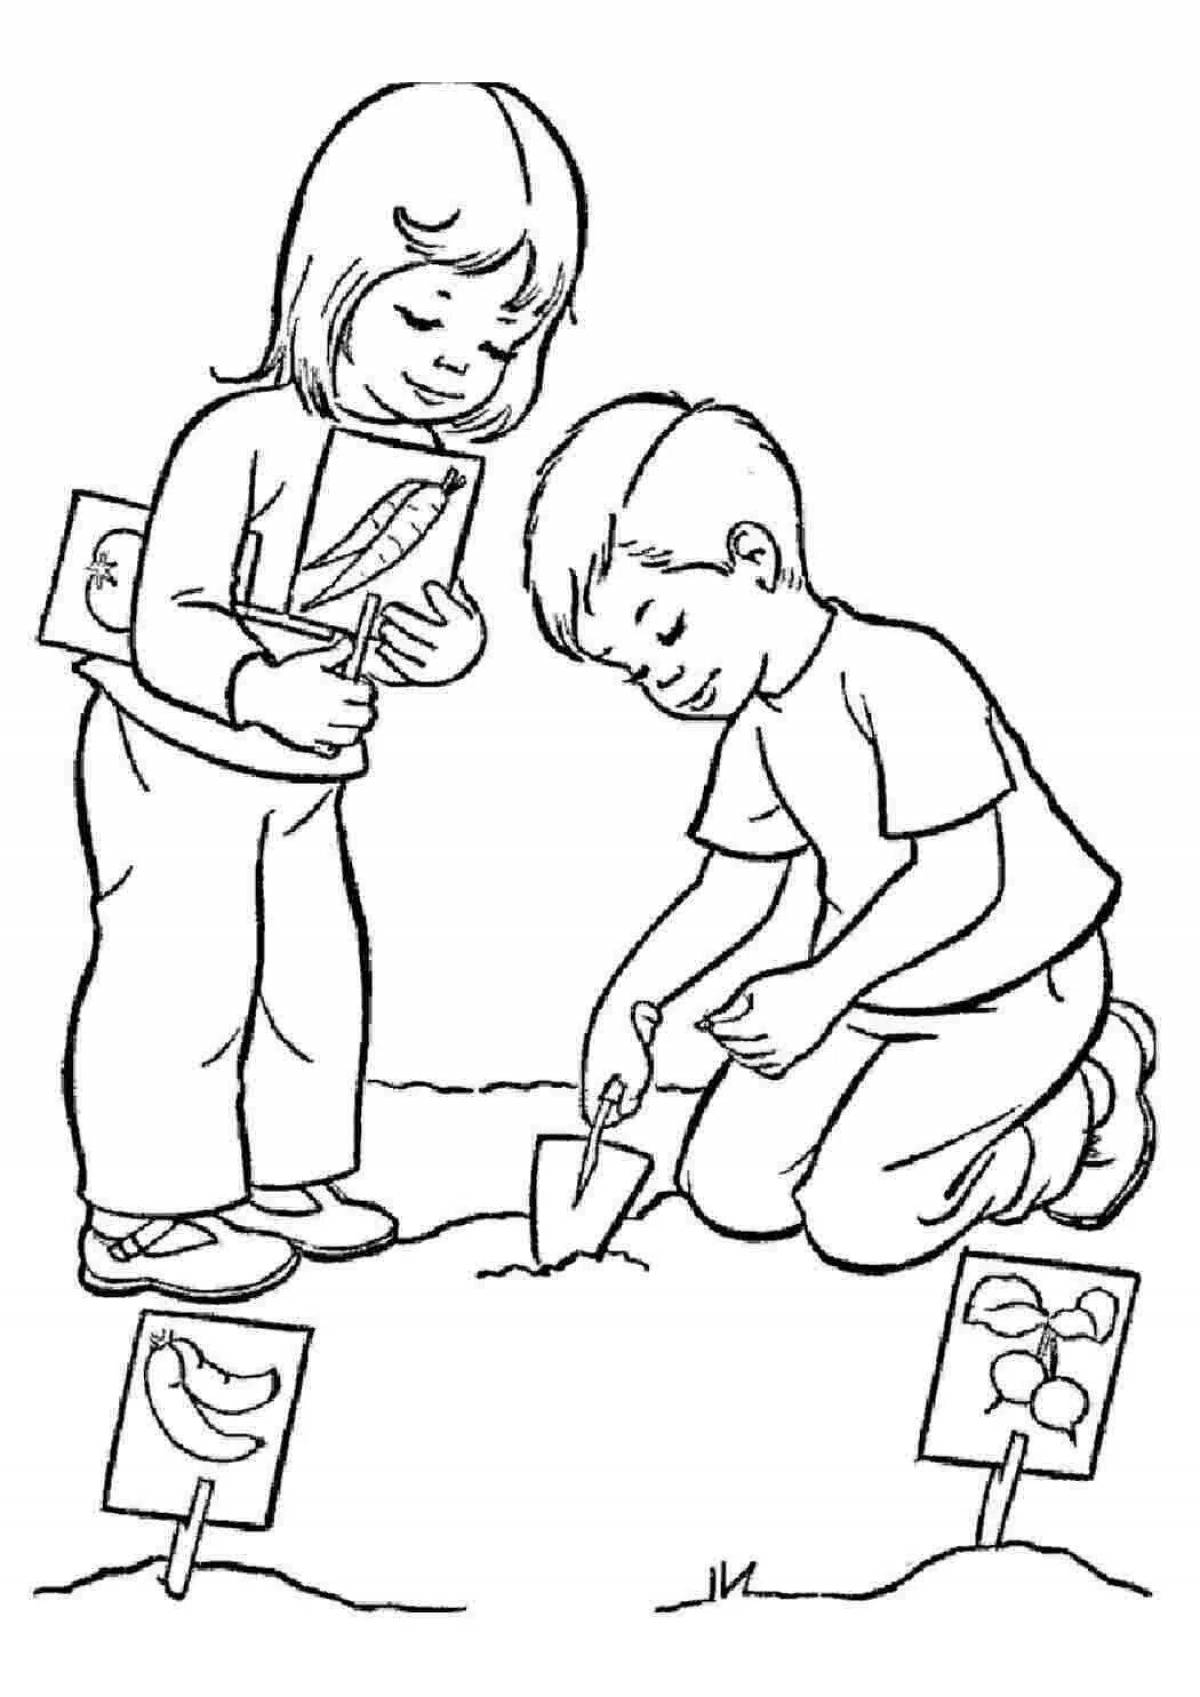 Coloring book youthful good deeds